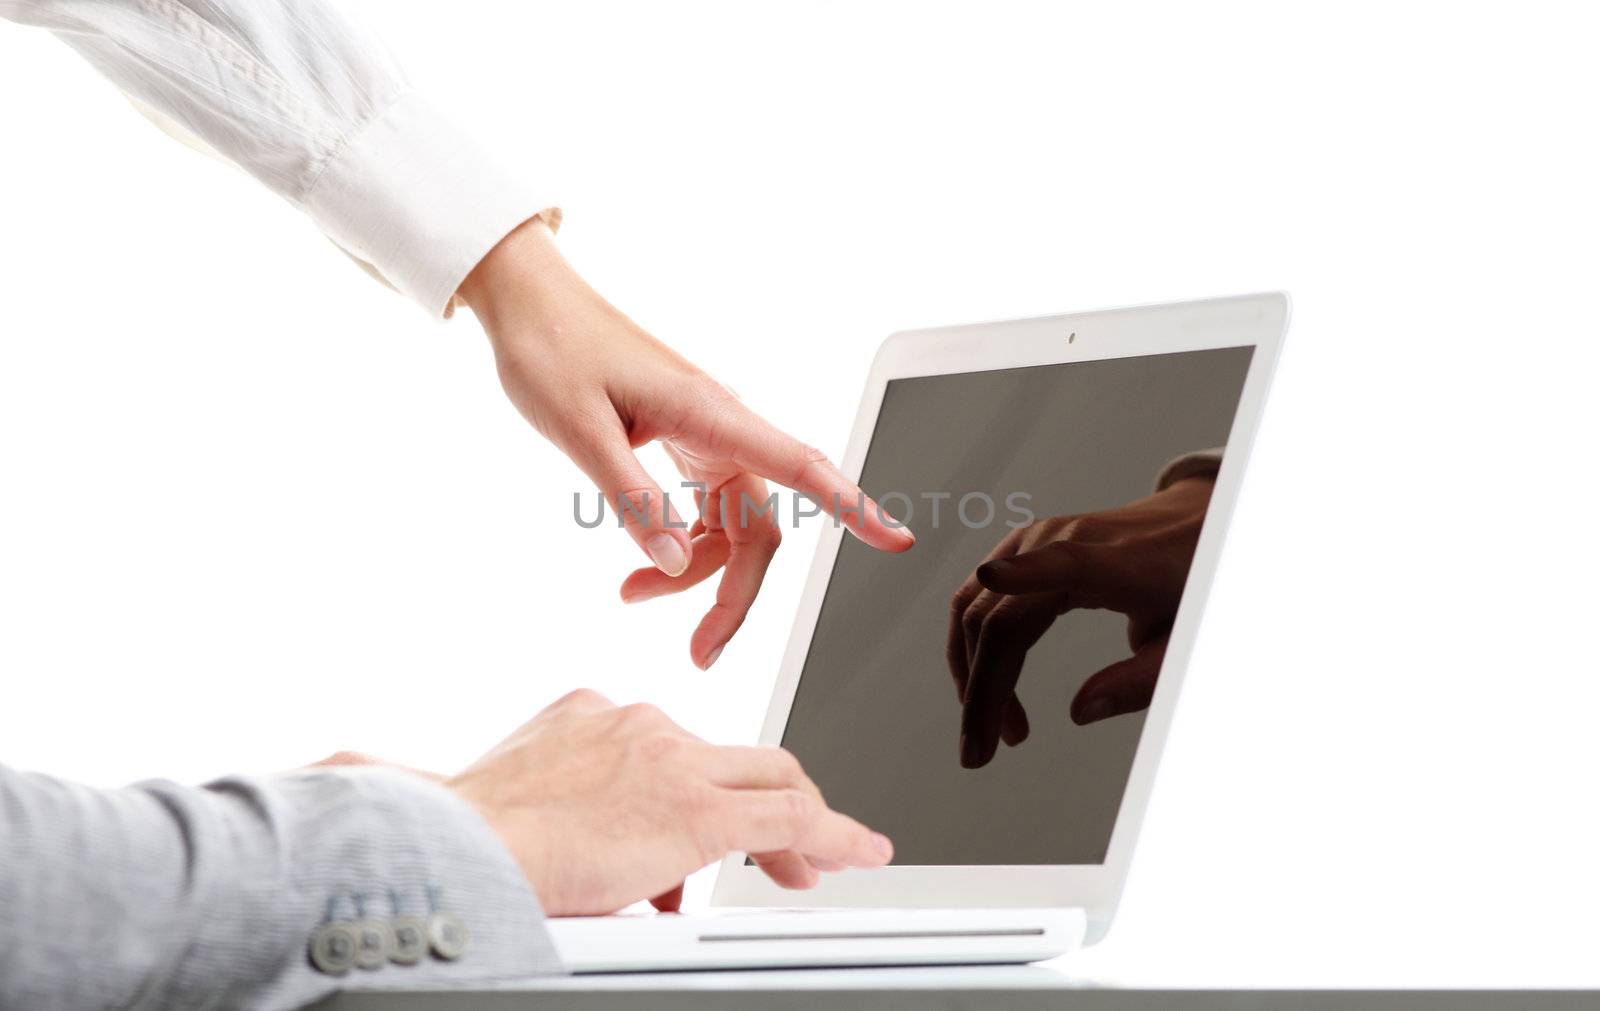  two business peoples at working on white background